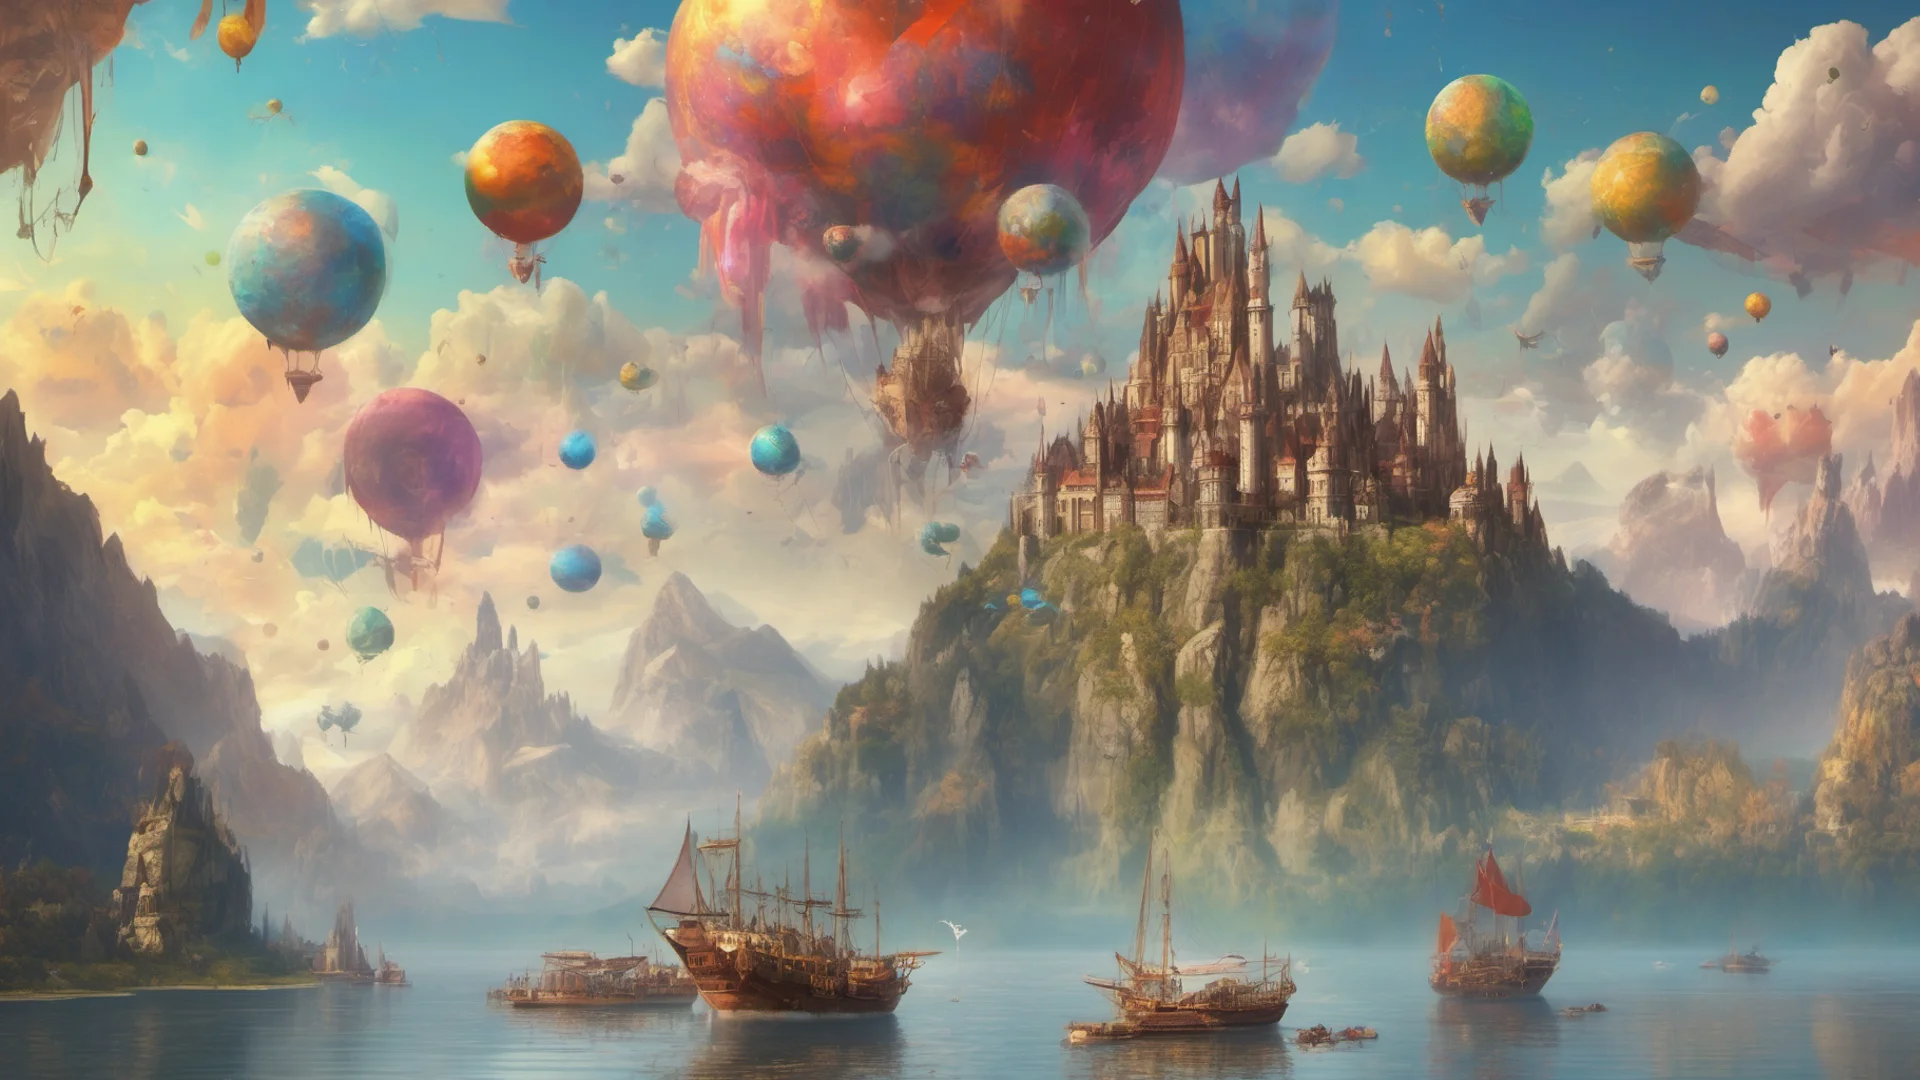 epic fantasy environment castle on tall mountain lakes sky with many colorful planets boats sailing airships and blimps floating   good looking trending fantastic 1 wide